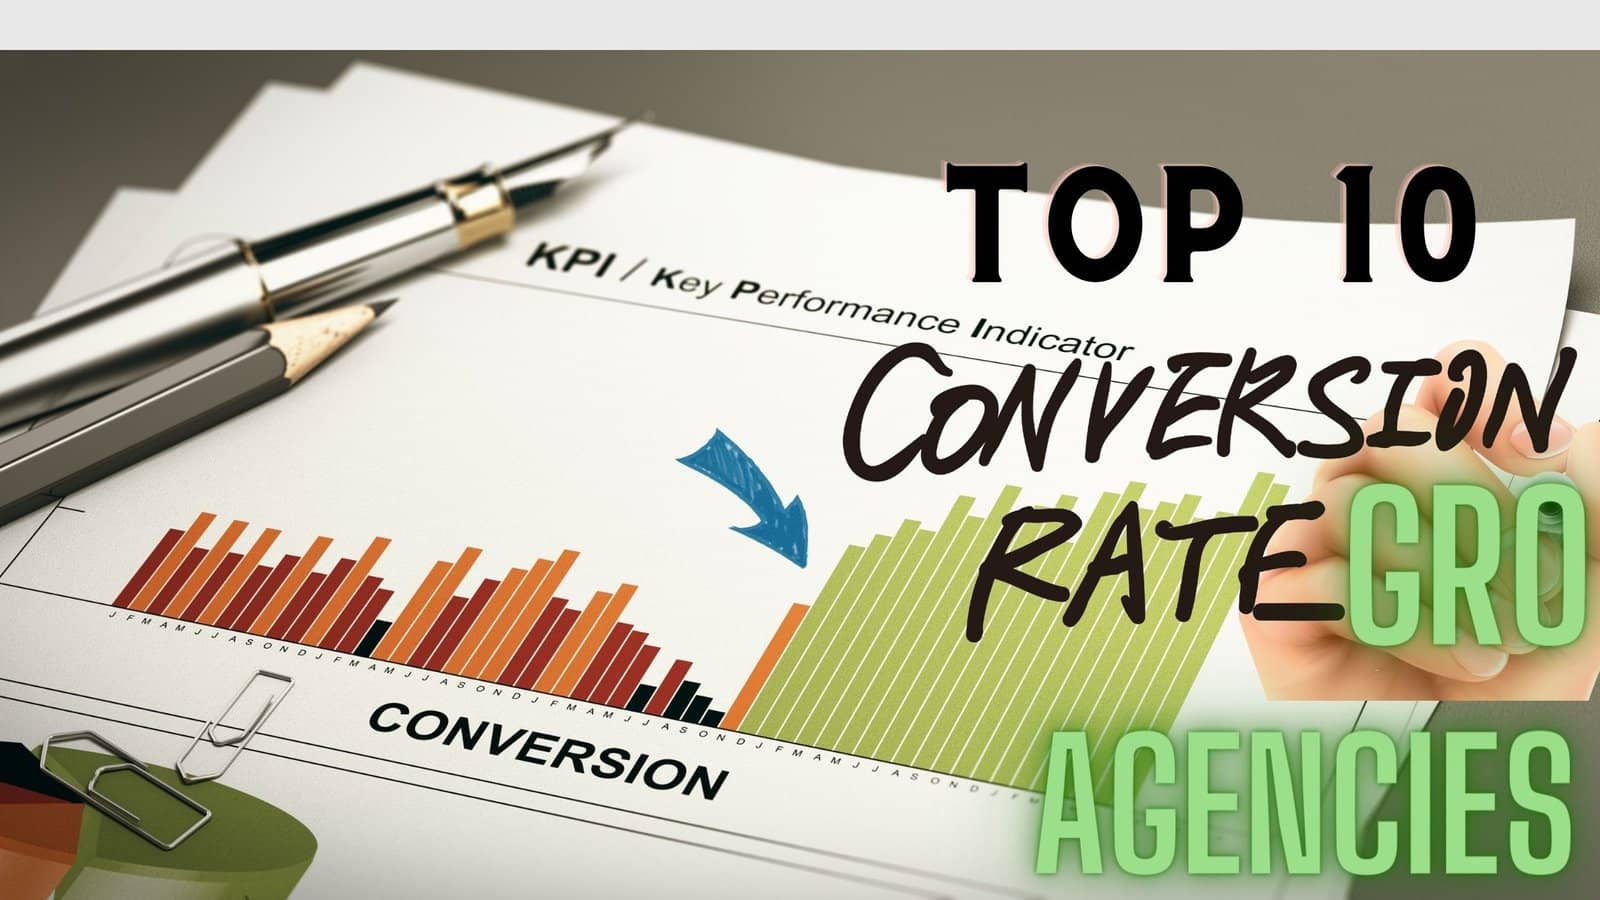 You are currently viewing Top 10 Affordable Conversion Rate Optimization CRO Agencies.